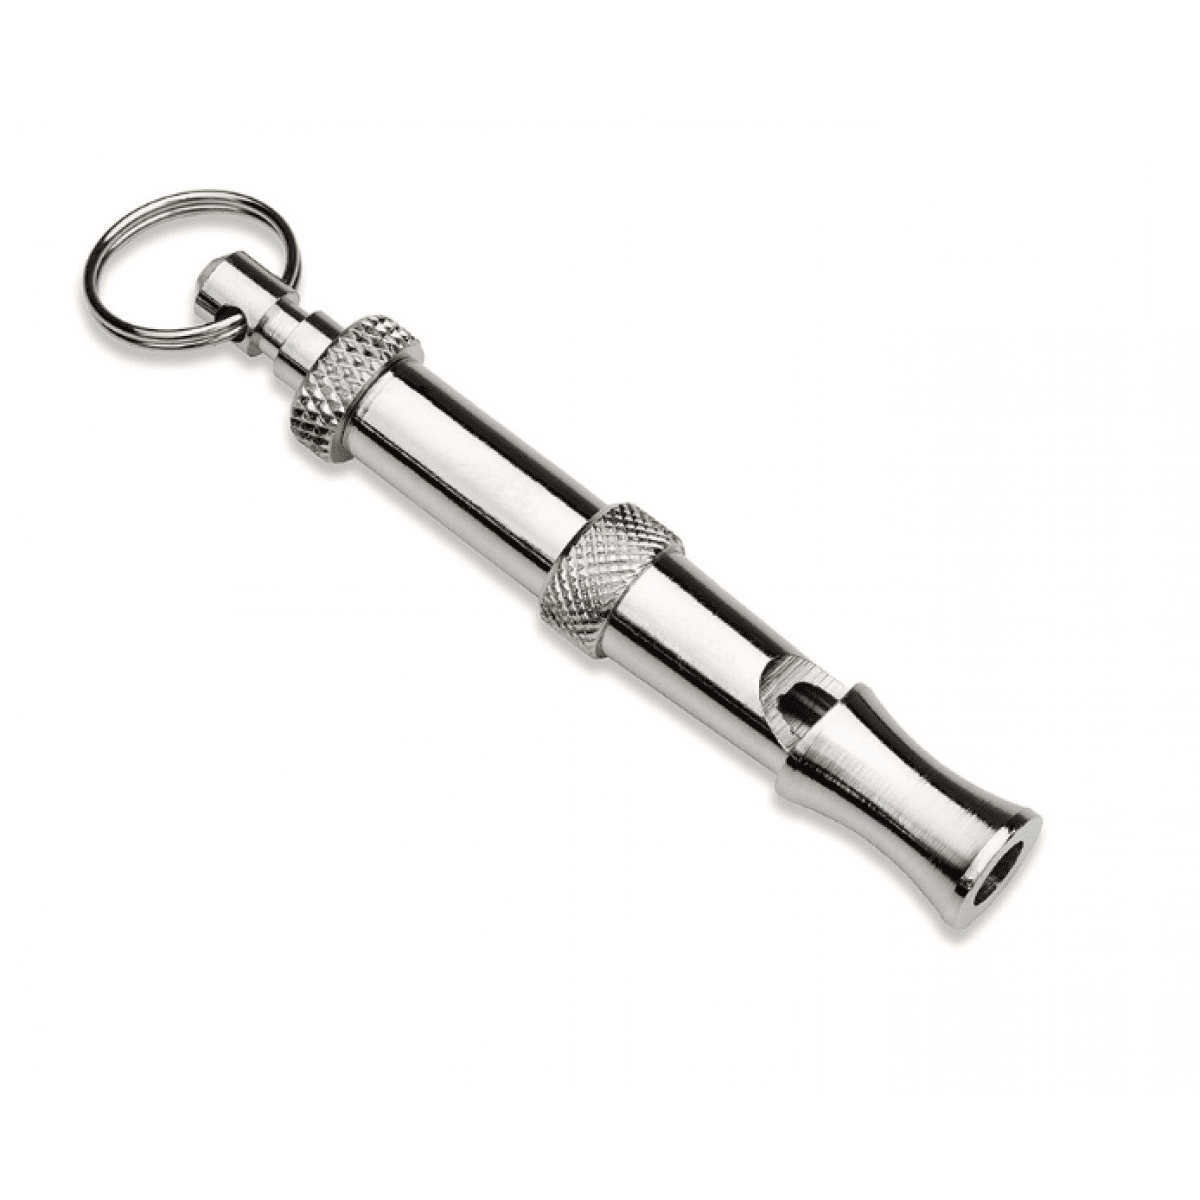 COA High Frequency Whistle – Pawfect Supplies Ltd Product Image